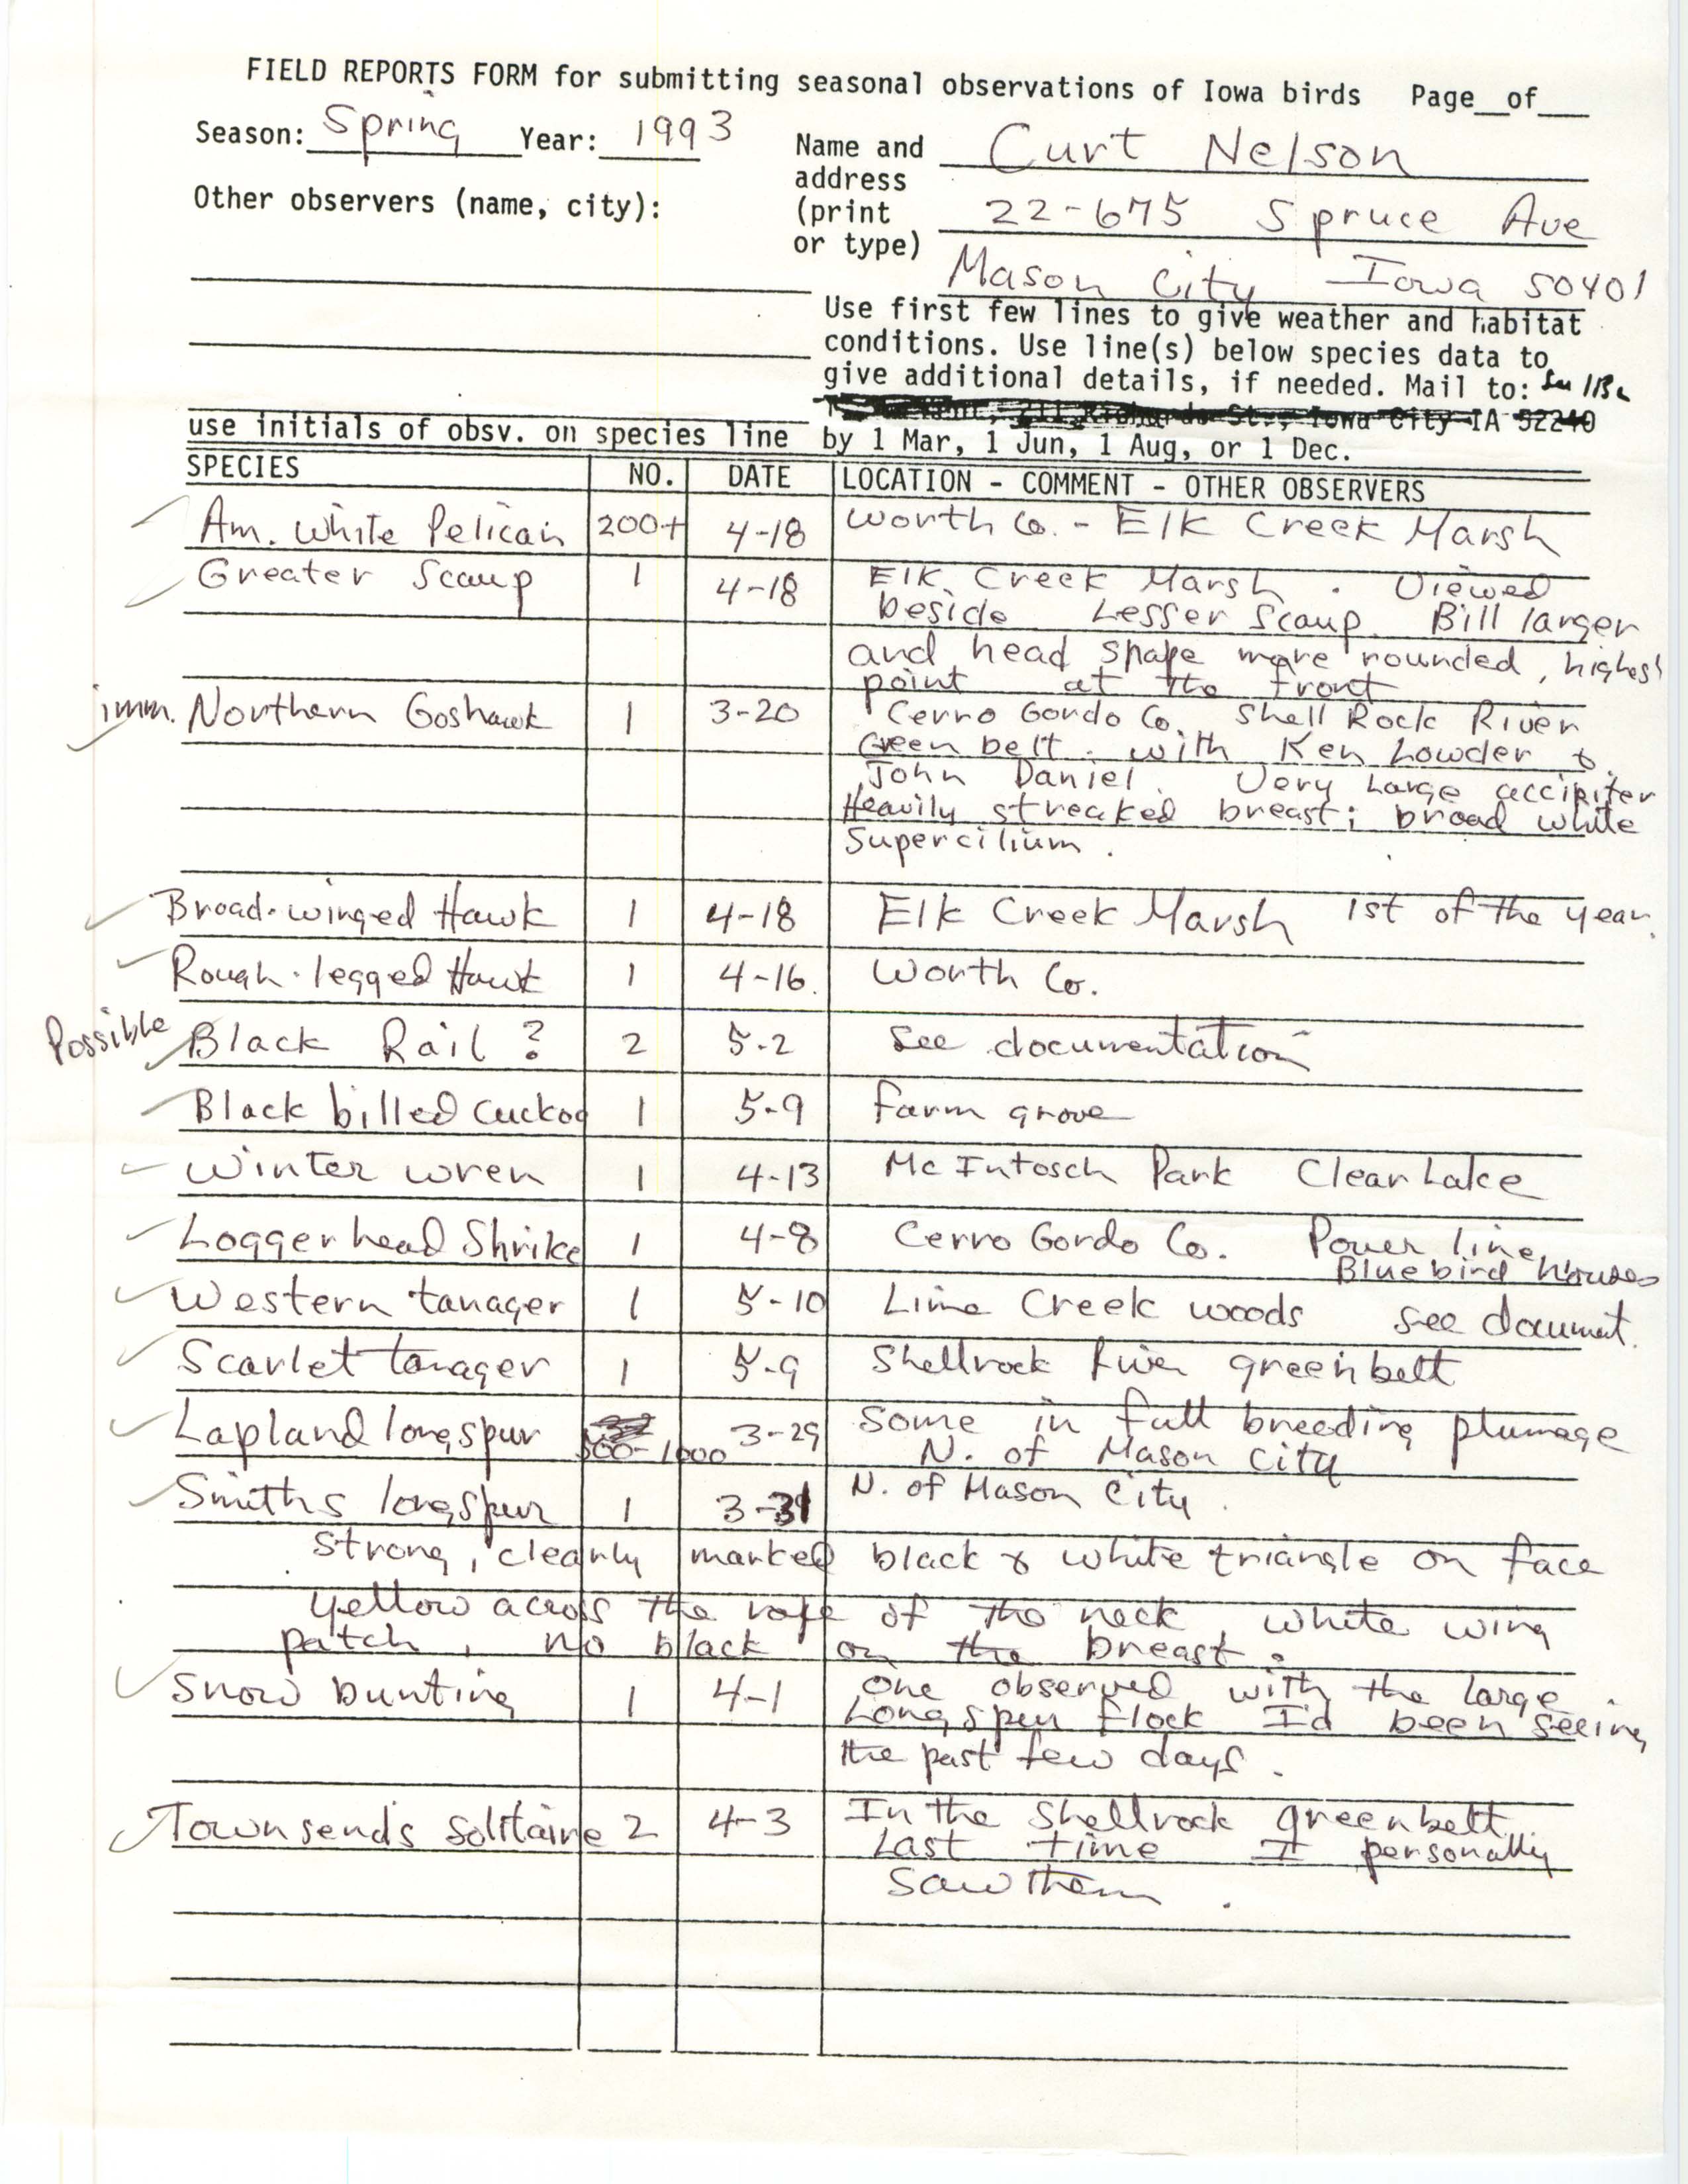 Field reports form for submitting seasonal observations of Iowa birds, Curt Nelson, Spring 1993